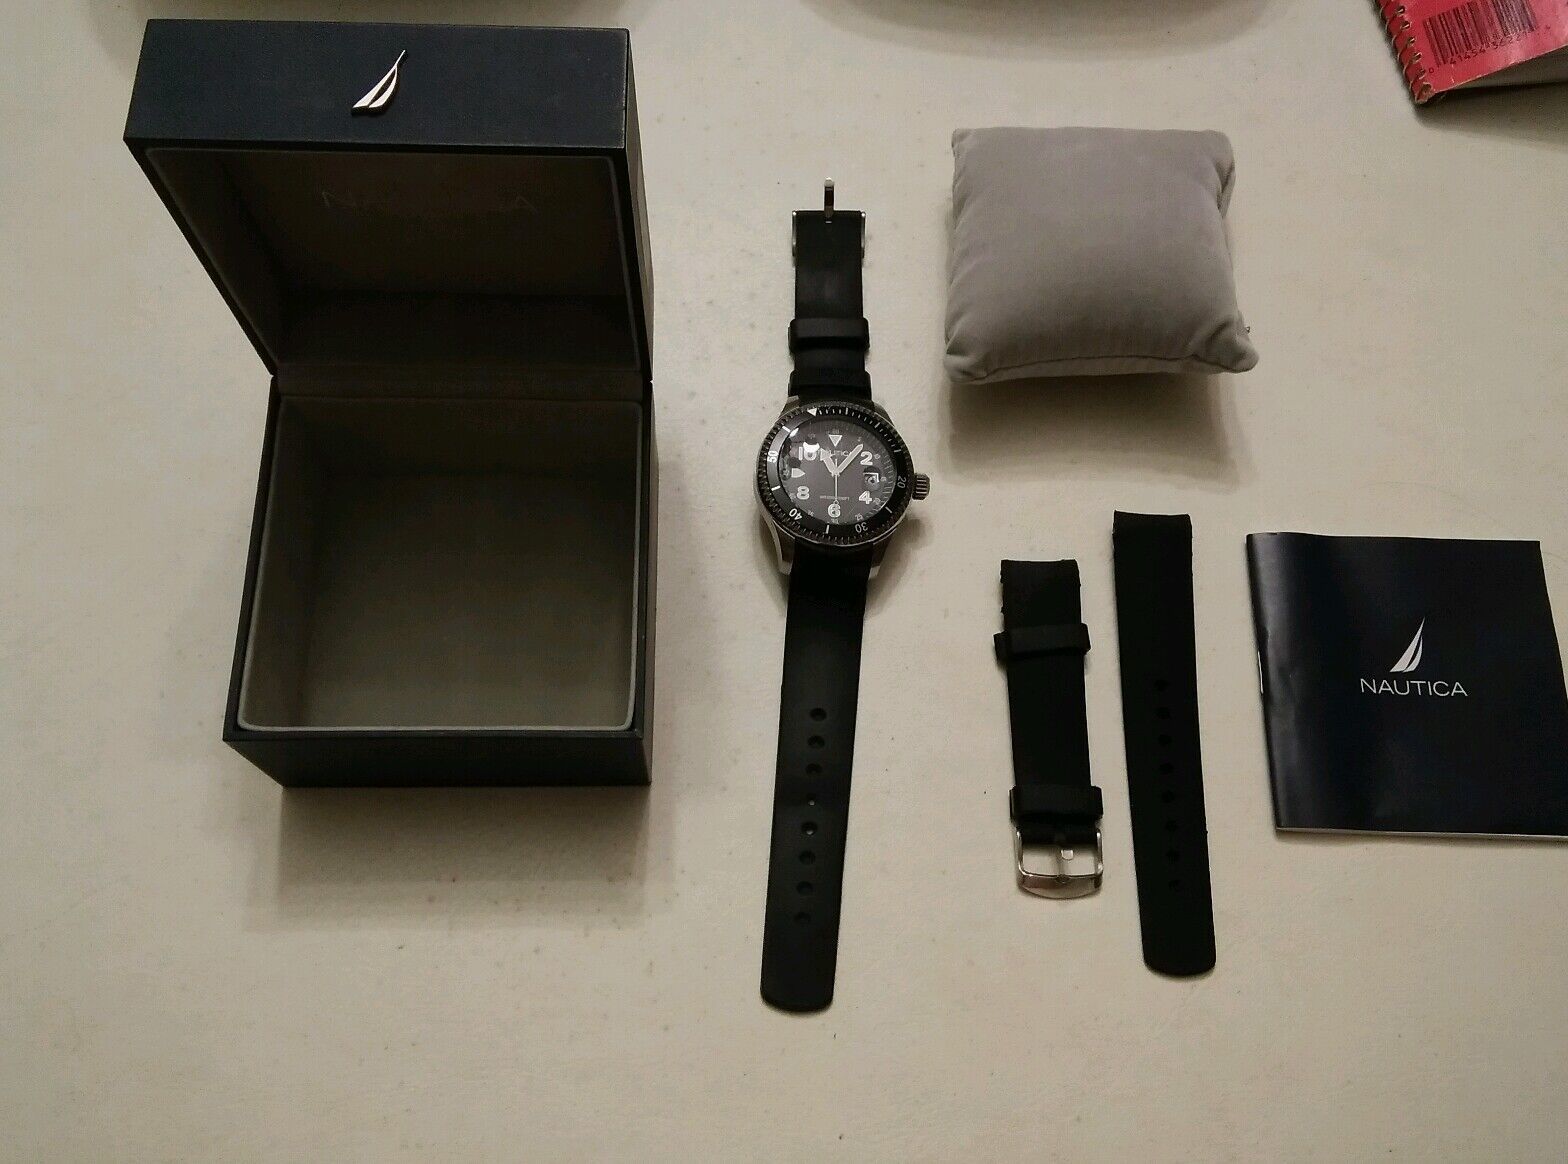 025 N16533G Nautica Classic Analog Men's Watch Box Papers Extra Silicone Band - $75.00